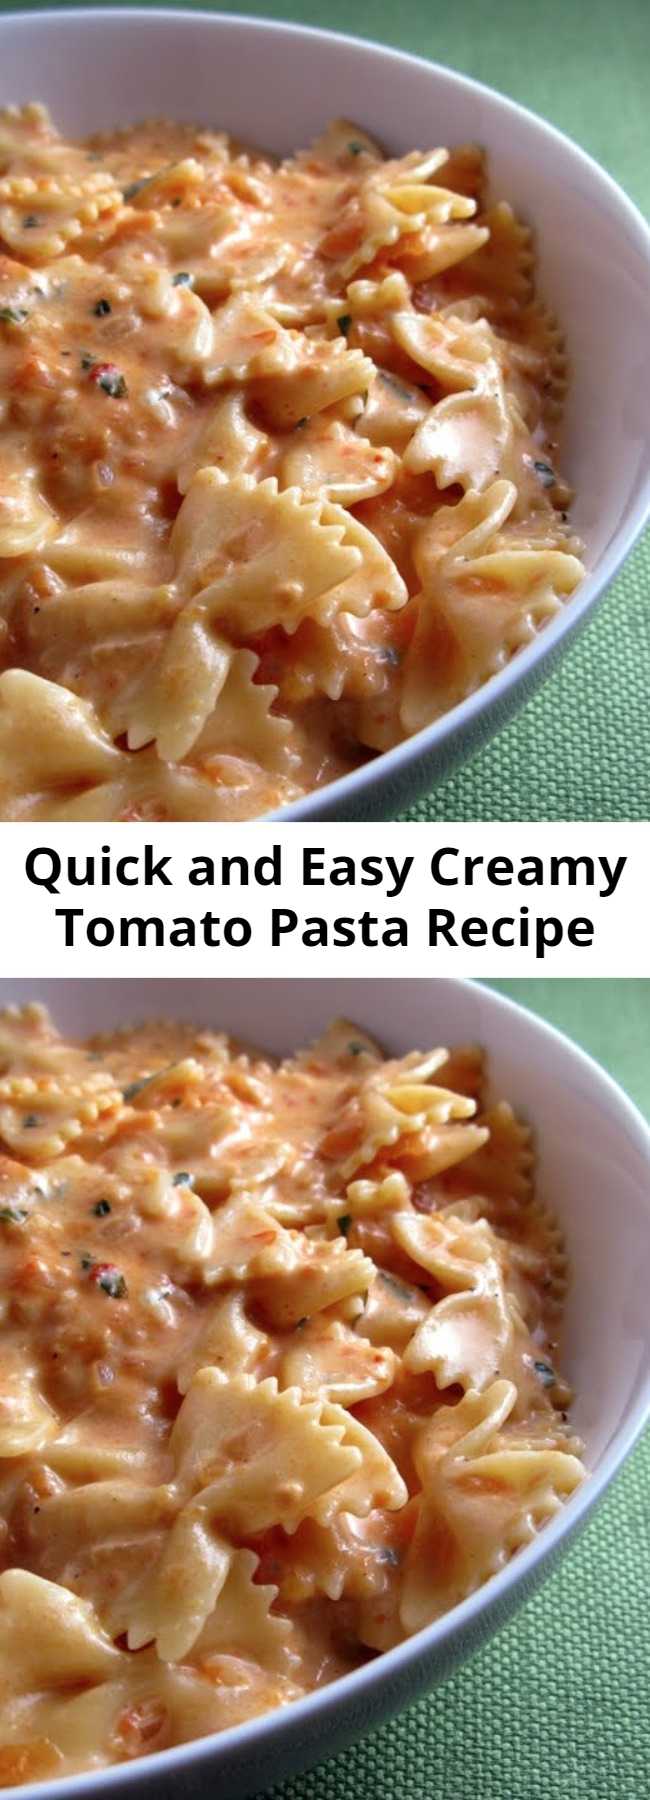 Quick and Easy Creamy Tomato Pasta Recipe - The perfect combination: tomatoes and cream and cheese. It was even better than i expected. Guaranteed you'll fight over who gets seconds, just like we did.